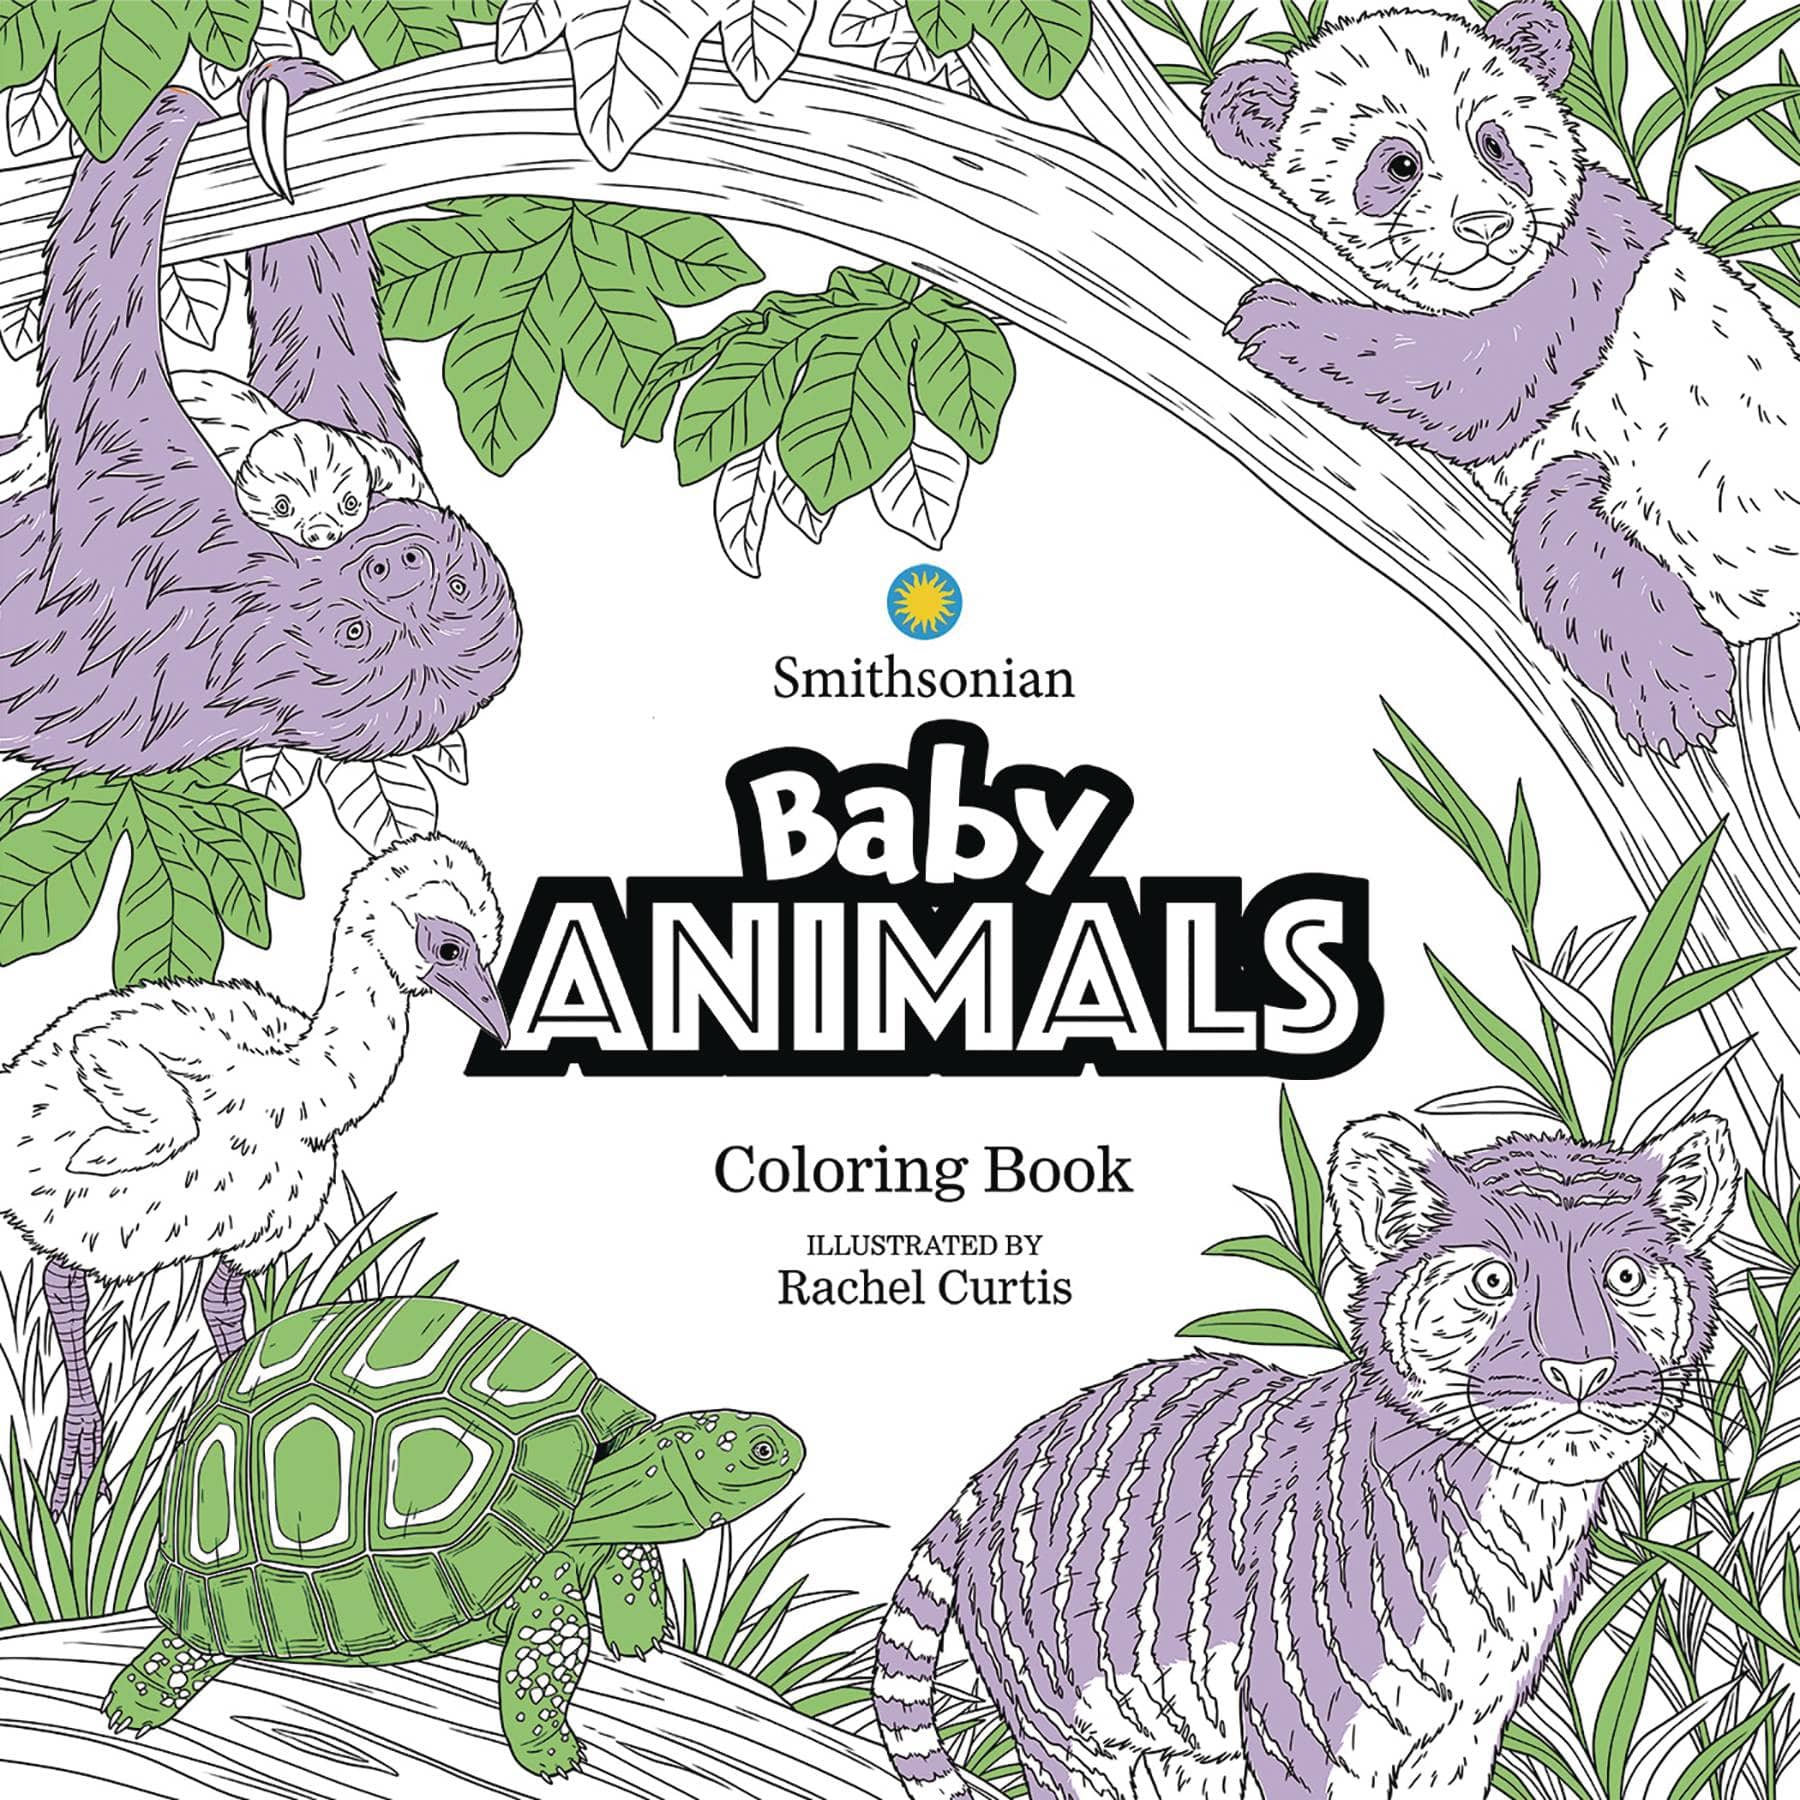 BABY ANIMALS A SMITHSONIAN COLORING BOOK - Third Eye